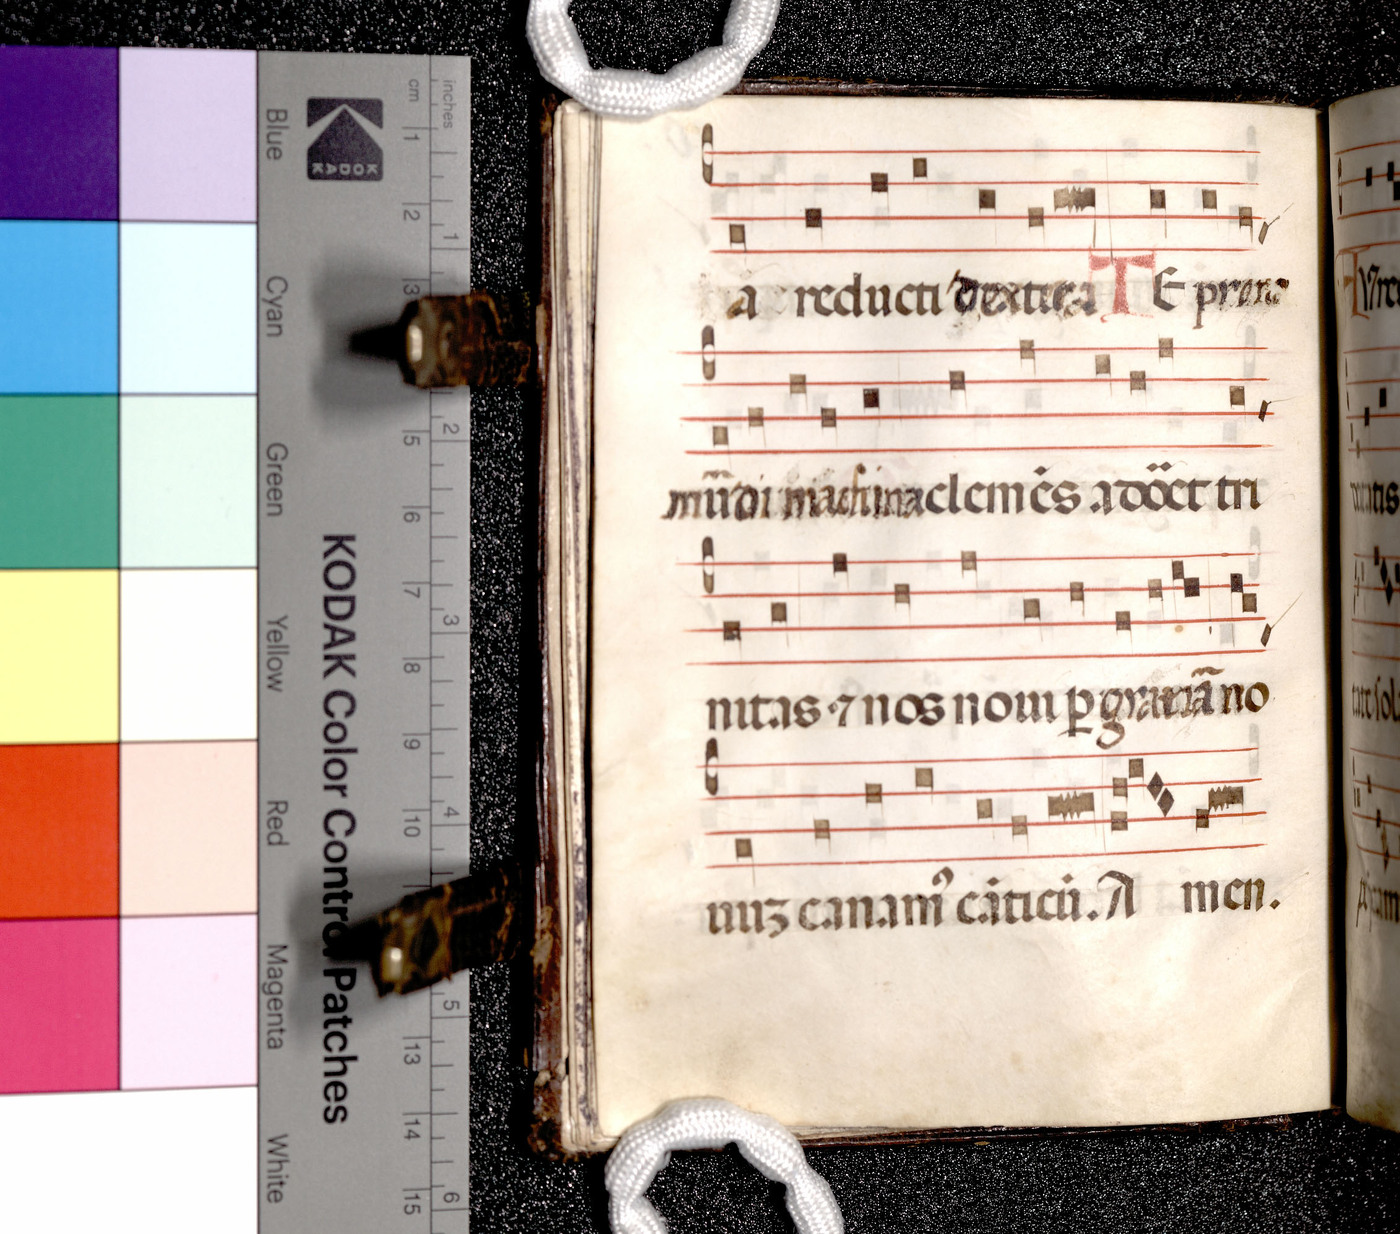 A left page of the Noted Hymnal beside the Kodak Color Control Patches.